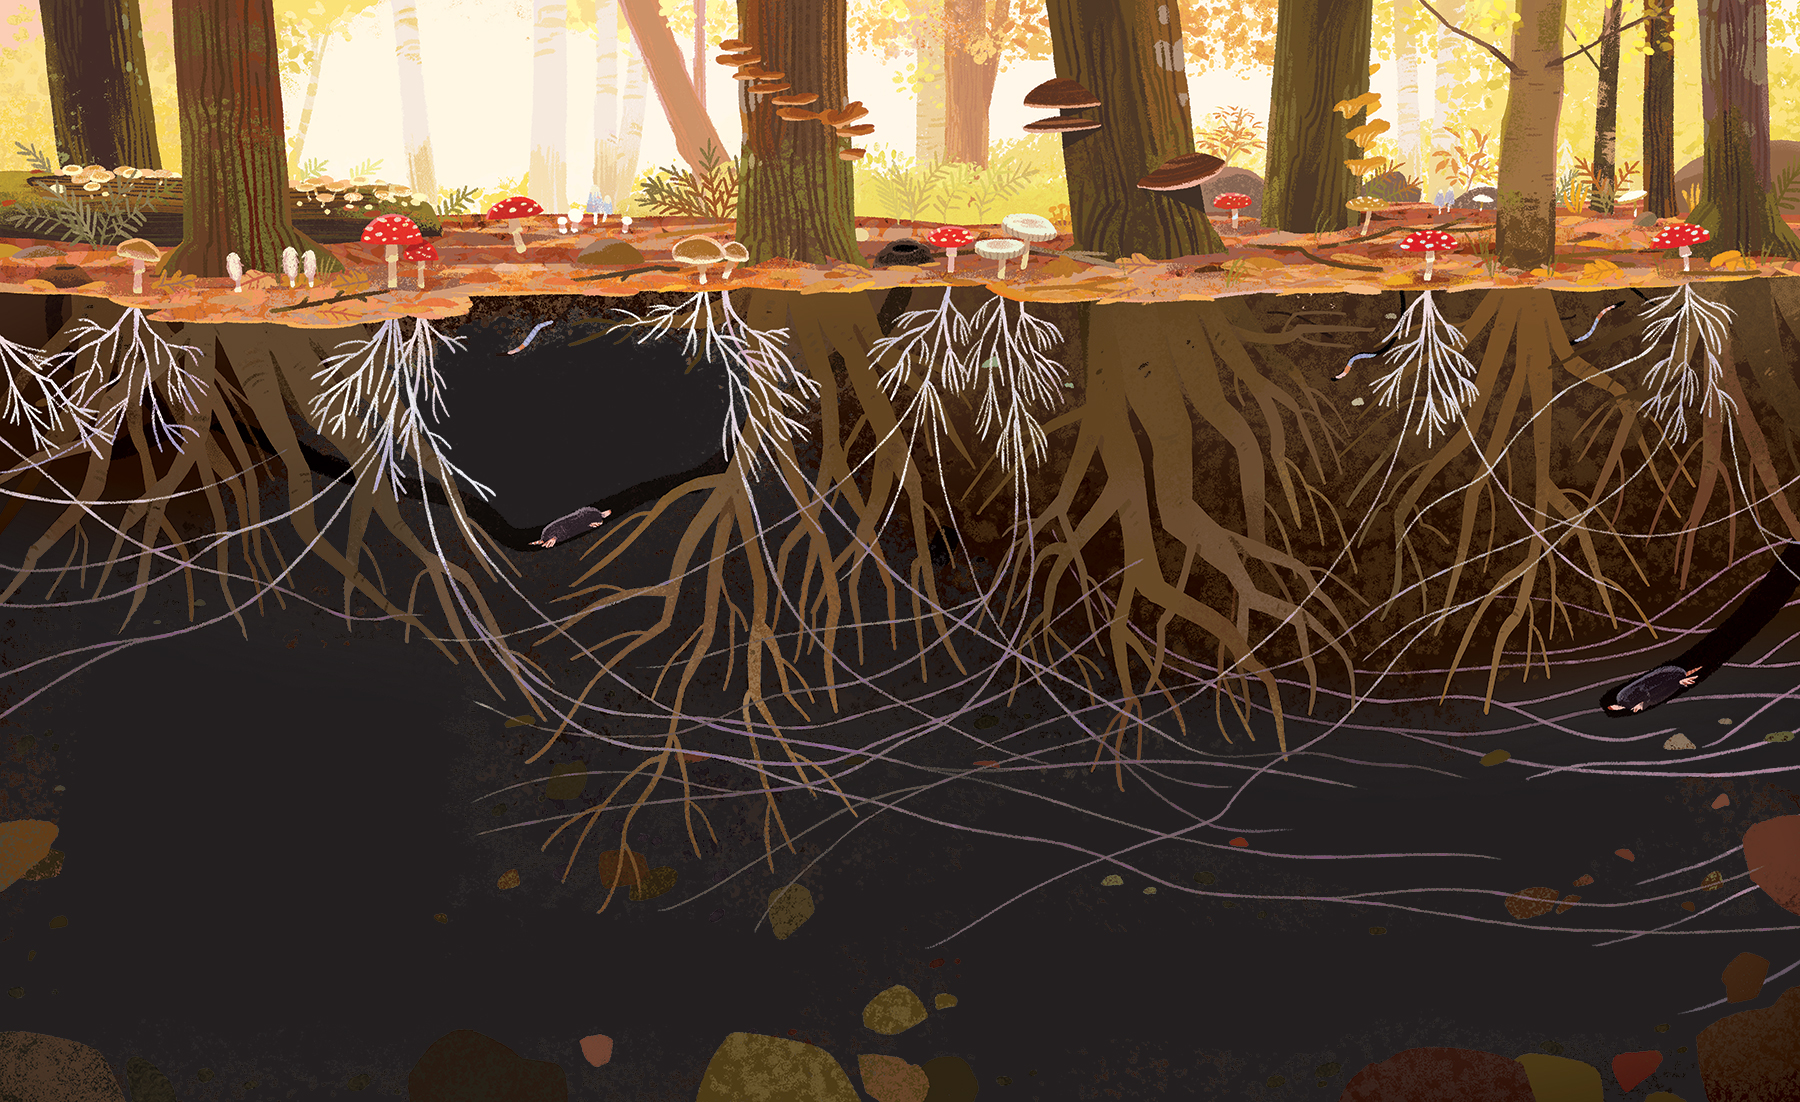 An illustration by Kim Smith from The Green Planet. It shows the underground network of plants and mushrooms